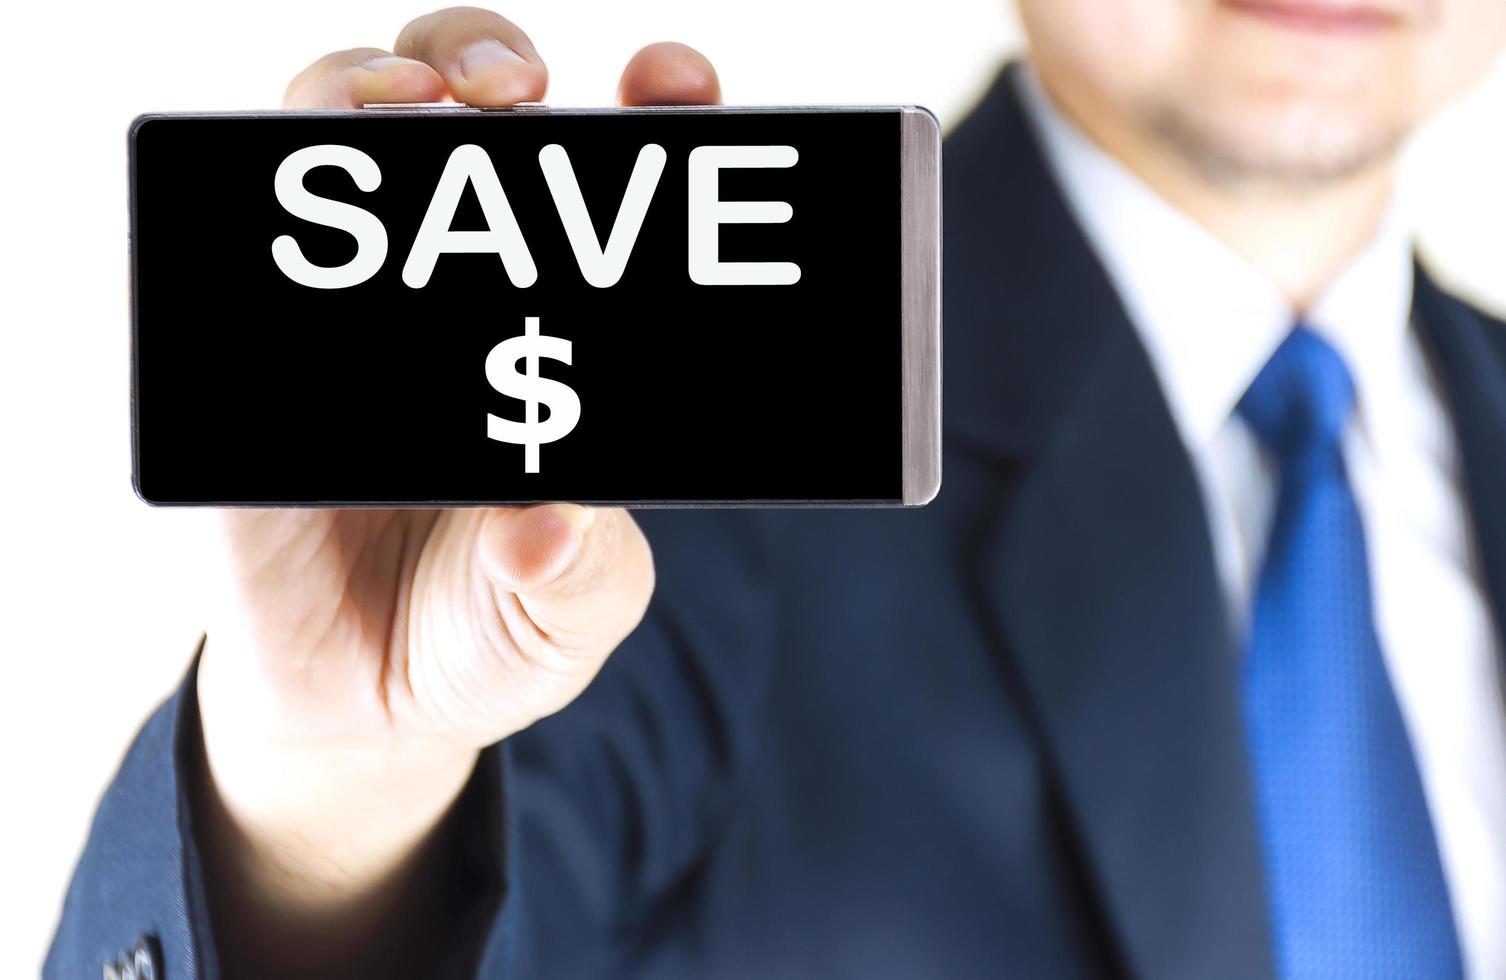 SAVE , word on mobile phone screen in blurred young businessman hand over white background, business concept photo